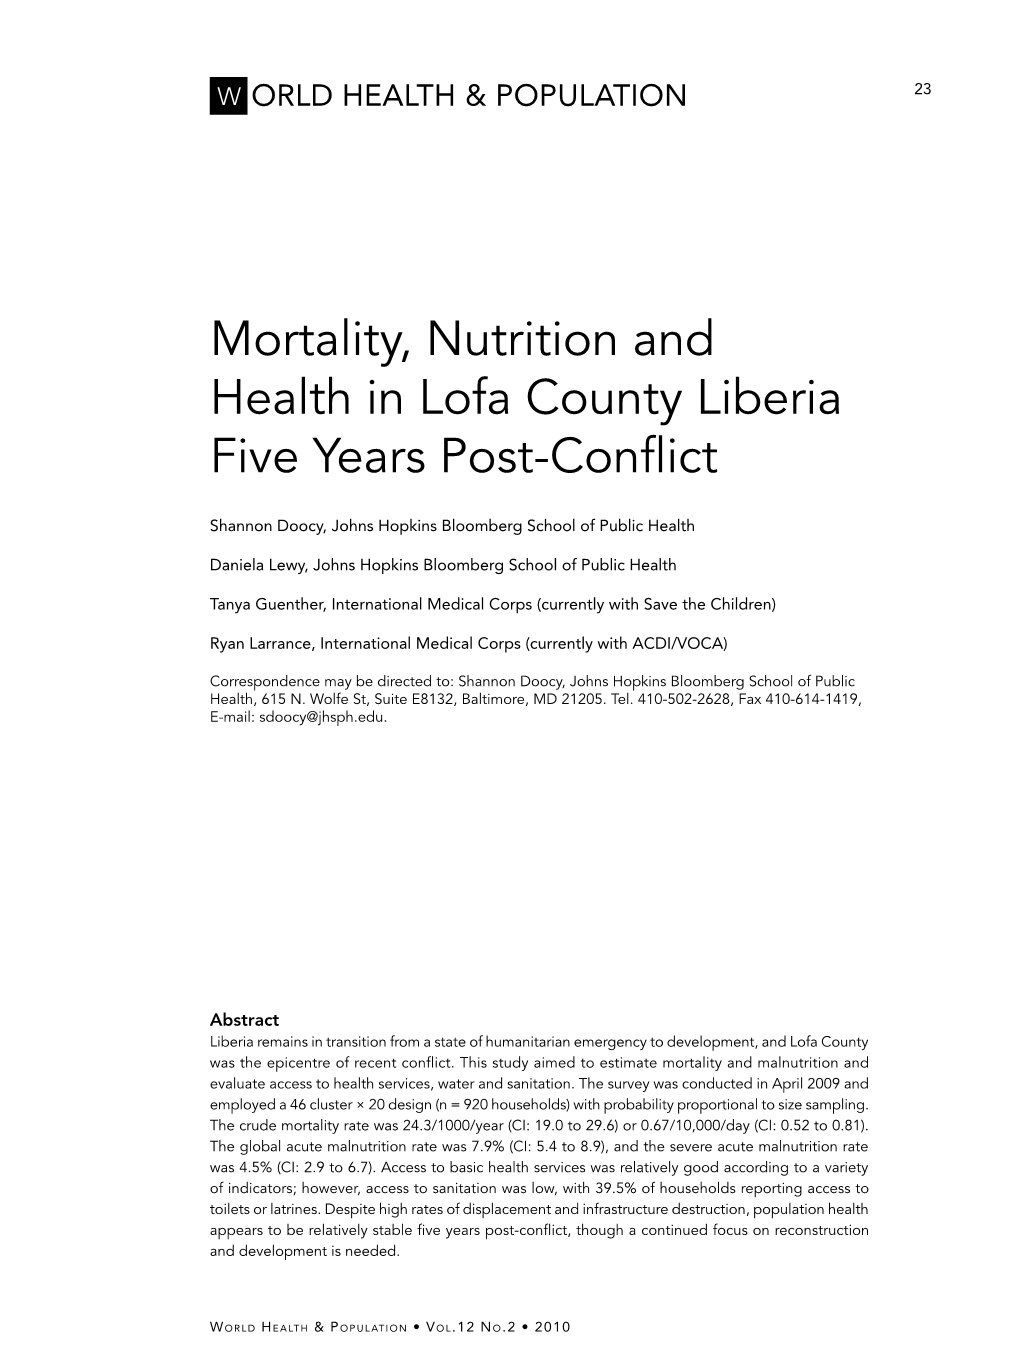 Mortality, Nutrition and Health in Lofa County Liberia Five Years Post-Conflict